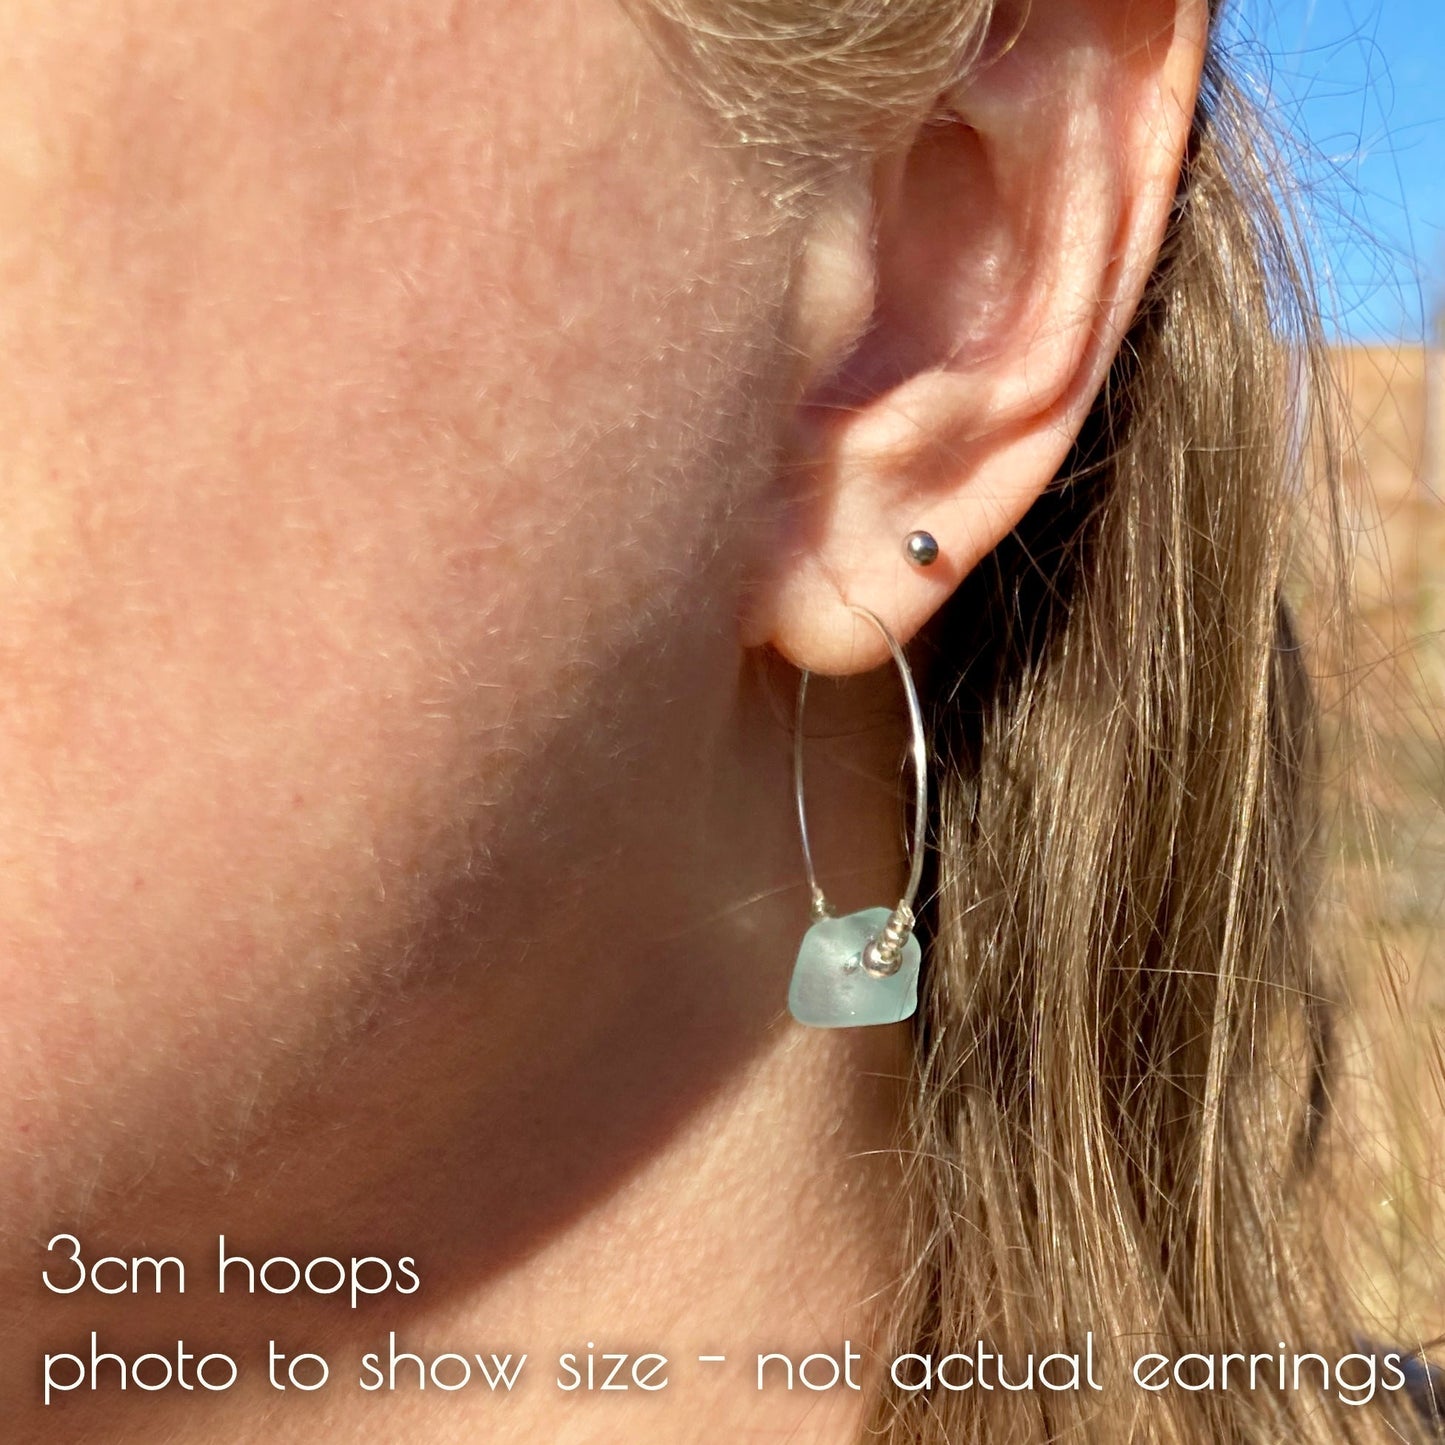 Large Green Sea Glass Hoop Earrings - 3cm - Sterling Silver with Amazonite Crystal Beads - East Neuk Beach Crafts